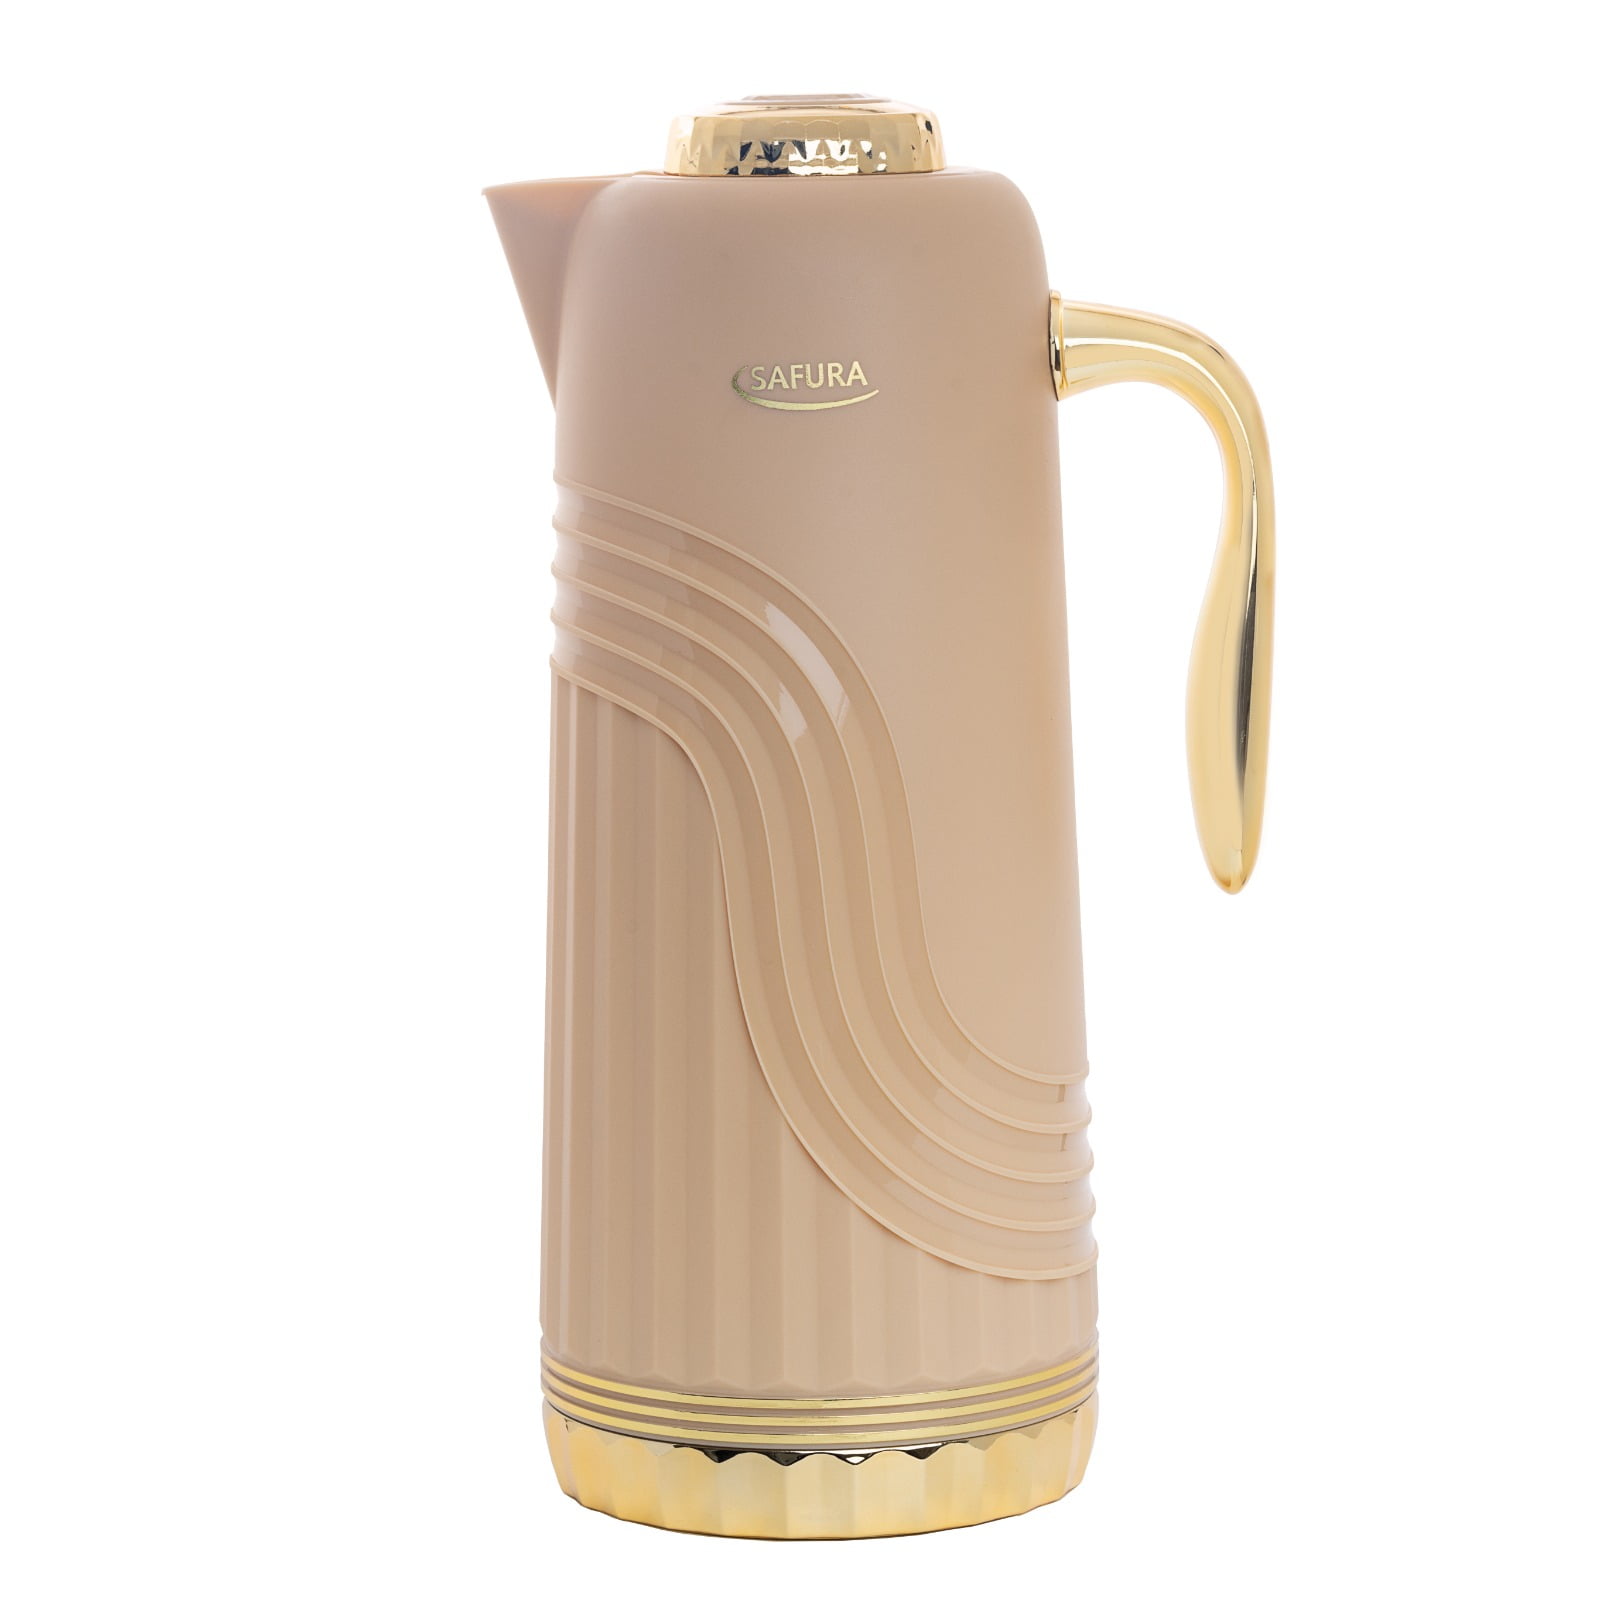 RELEA Vacuum Insulated Flask Thermal Pitcher with LED Temperature Display  2000ml Orange 